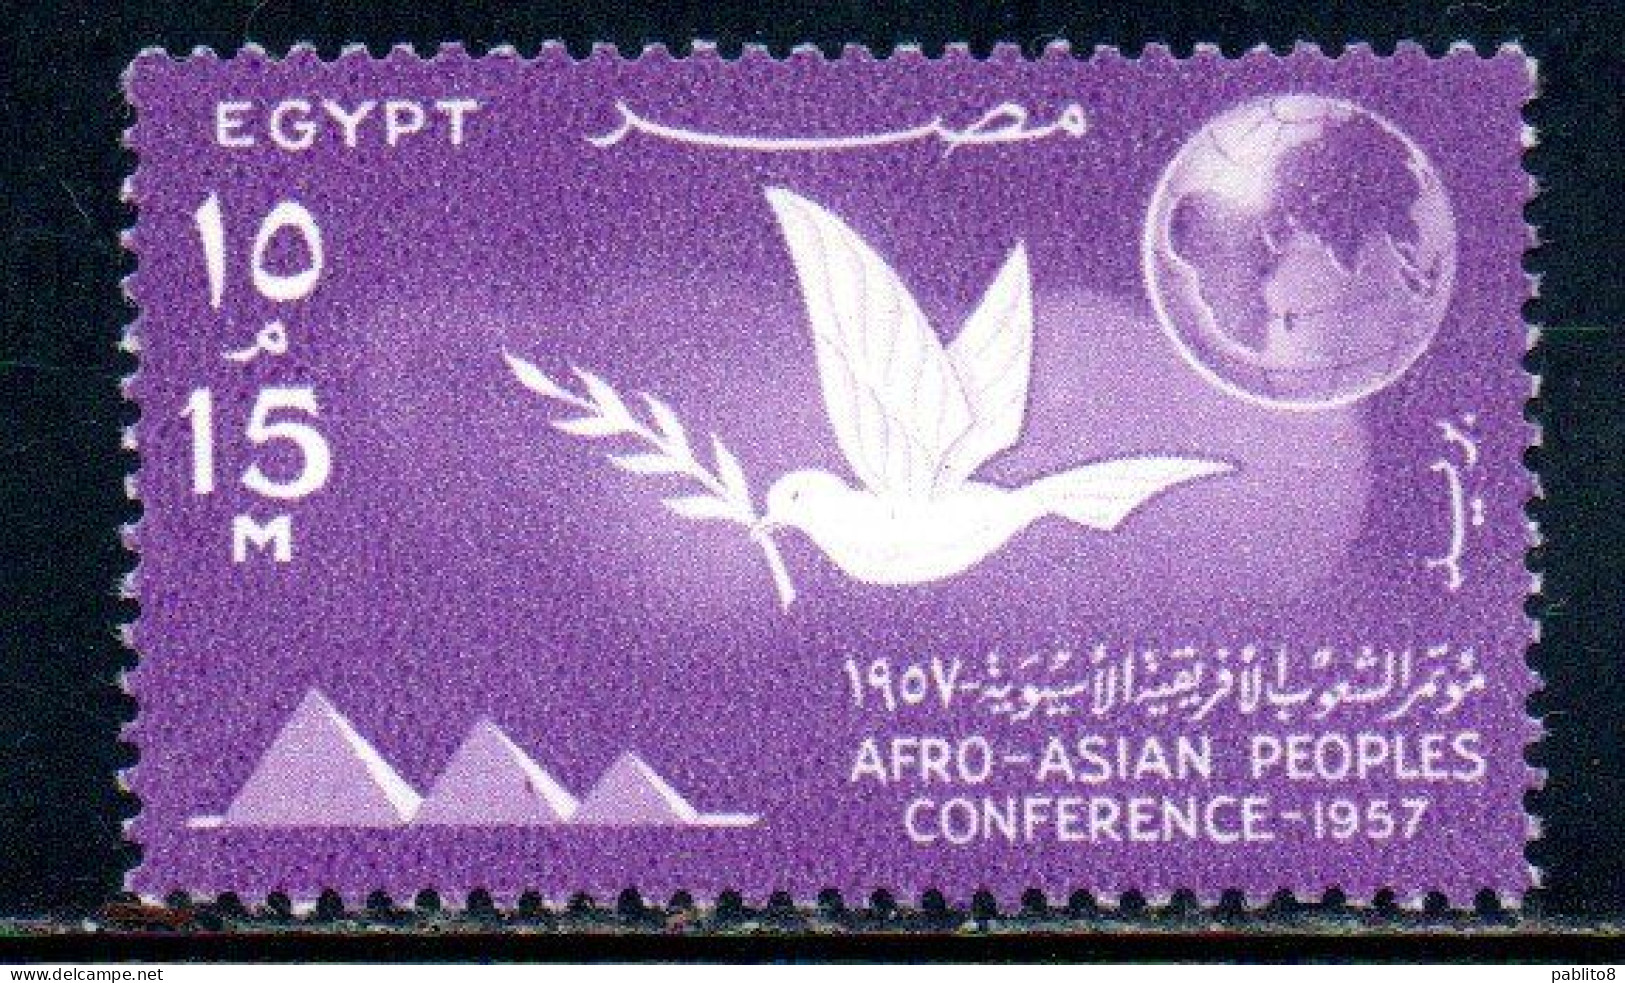 UAR EGYPT EGITTO 1957 AFRO-ASIAN PEOPLES CONFERENCE CAIRO PYRAMIDS DOVE AND GLOBE 15m MNH - Nuevos